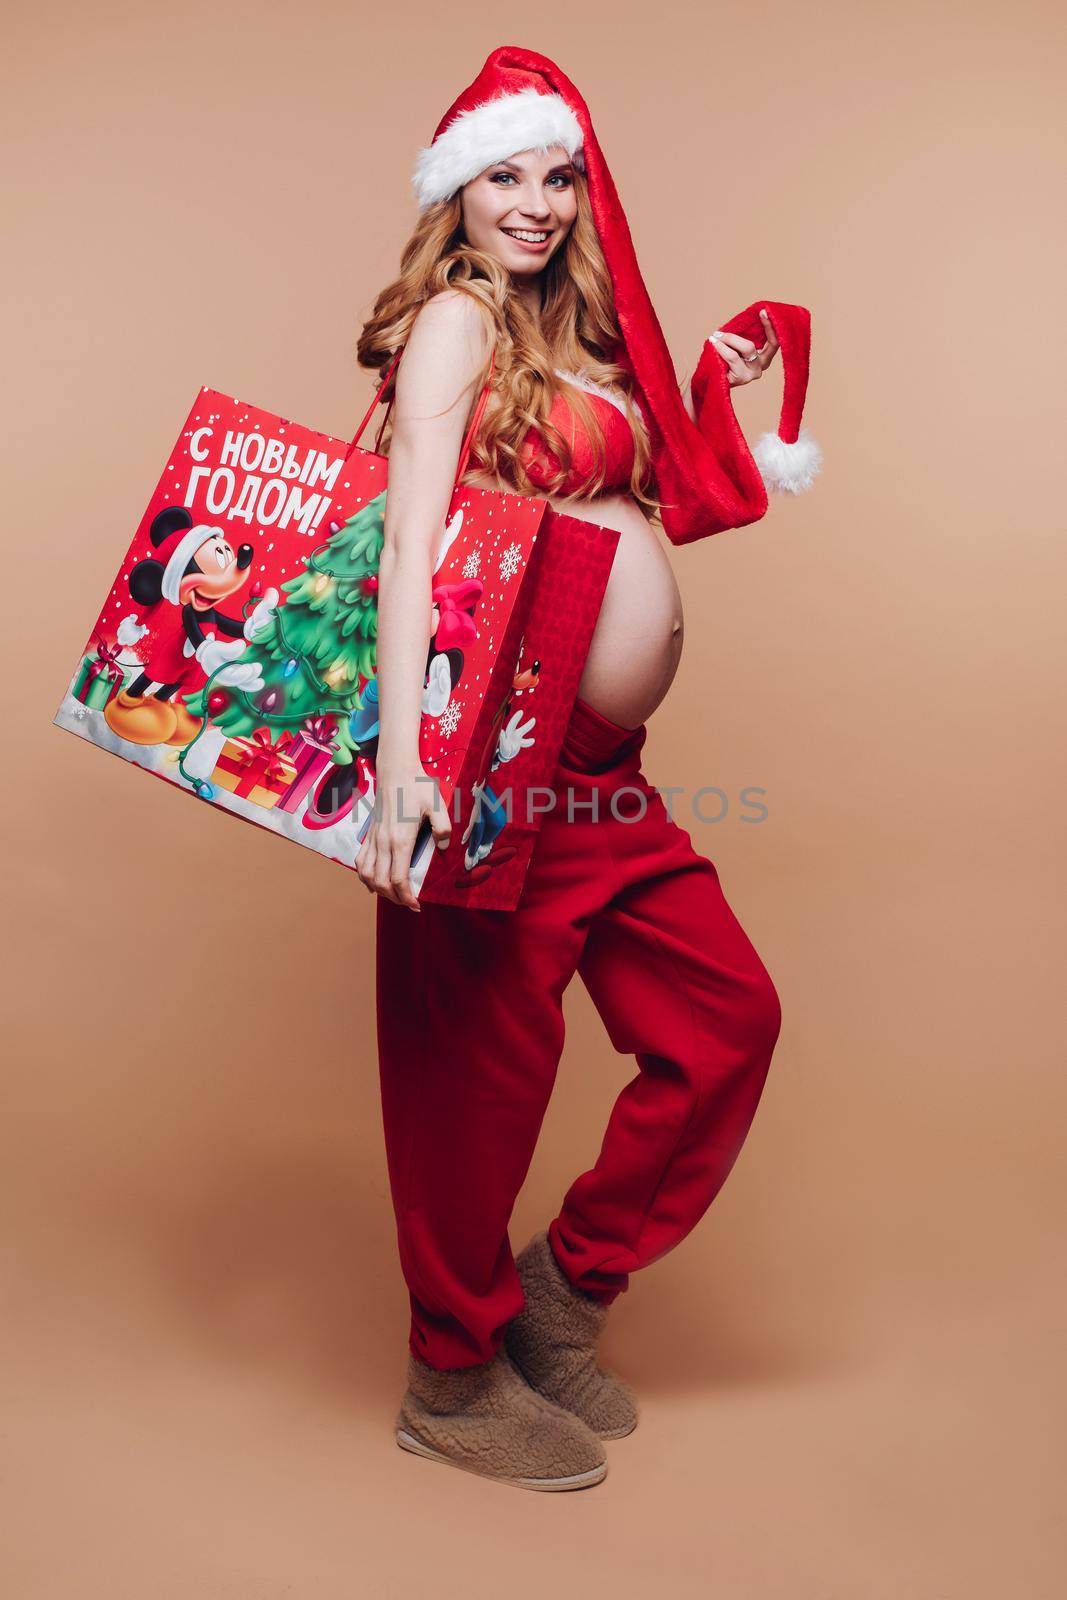 11 27 2019 Belarus Minsk: Waist up of pretty pregnant lady touching Santa Claus hat while loking at camera on beige background. Christmas and New Year concept